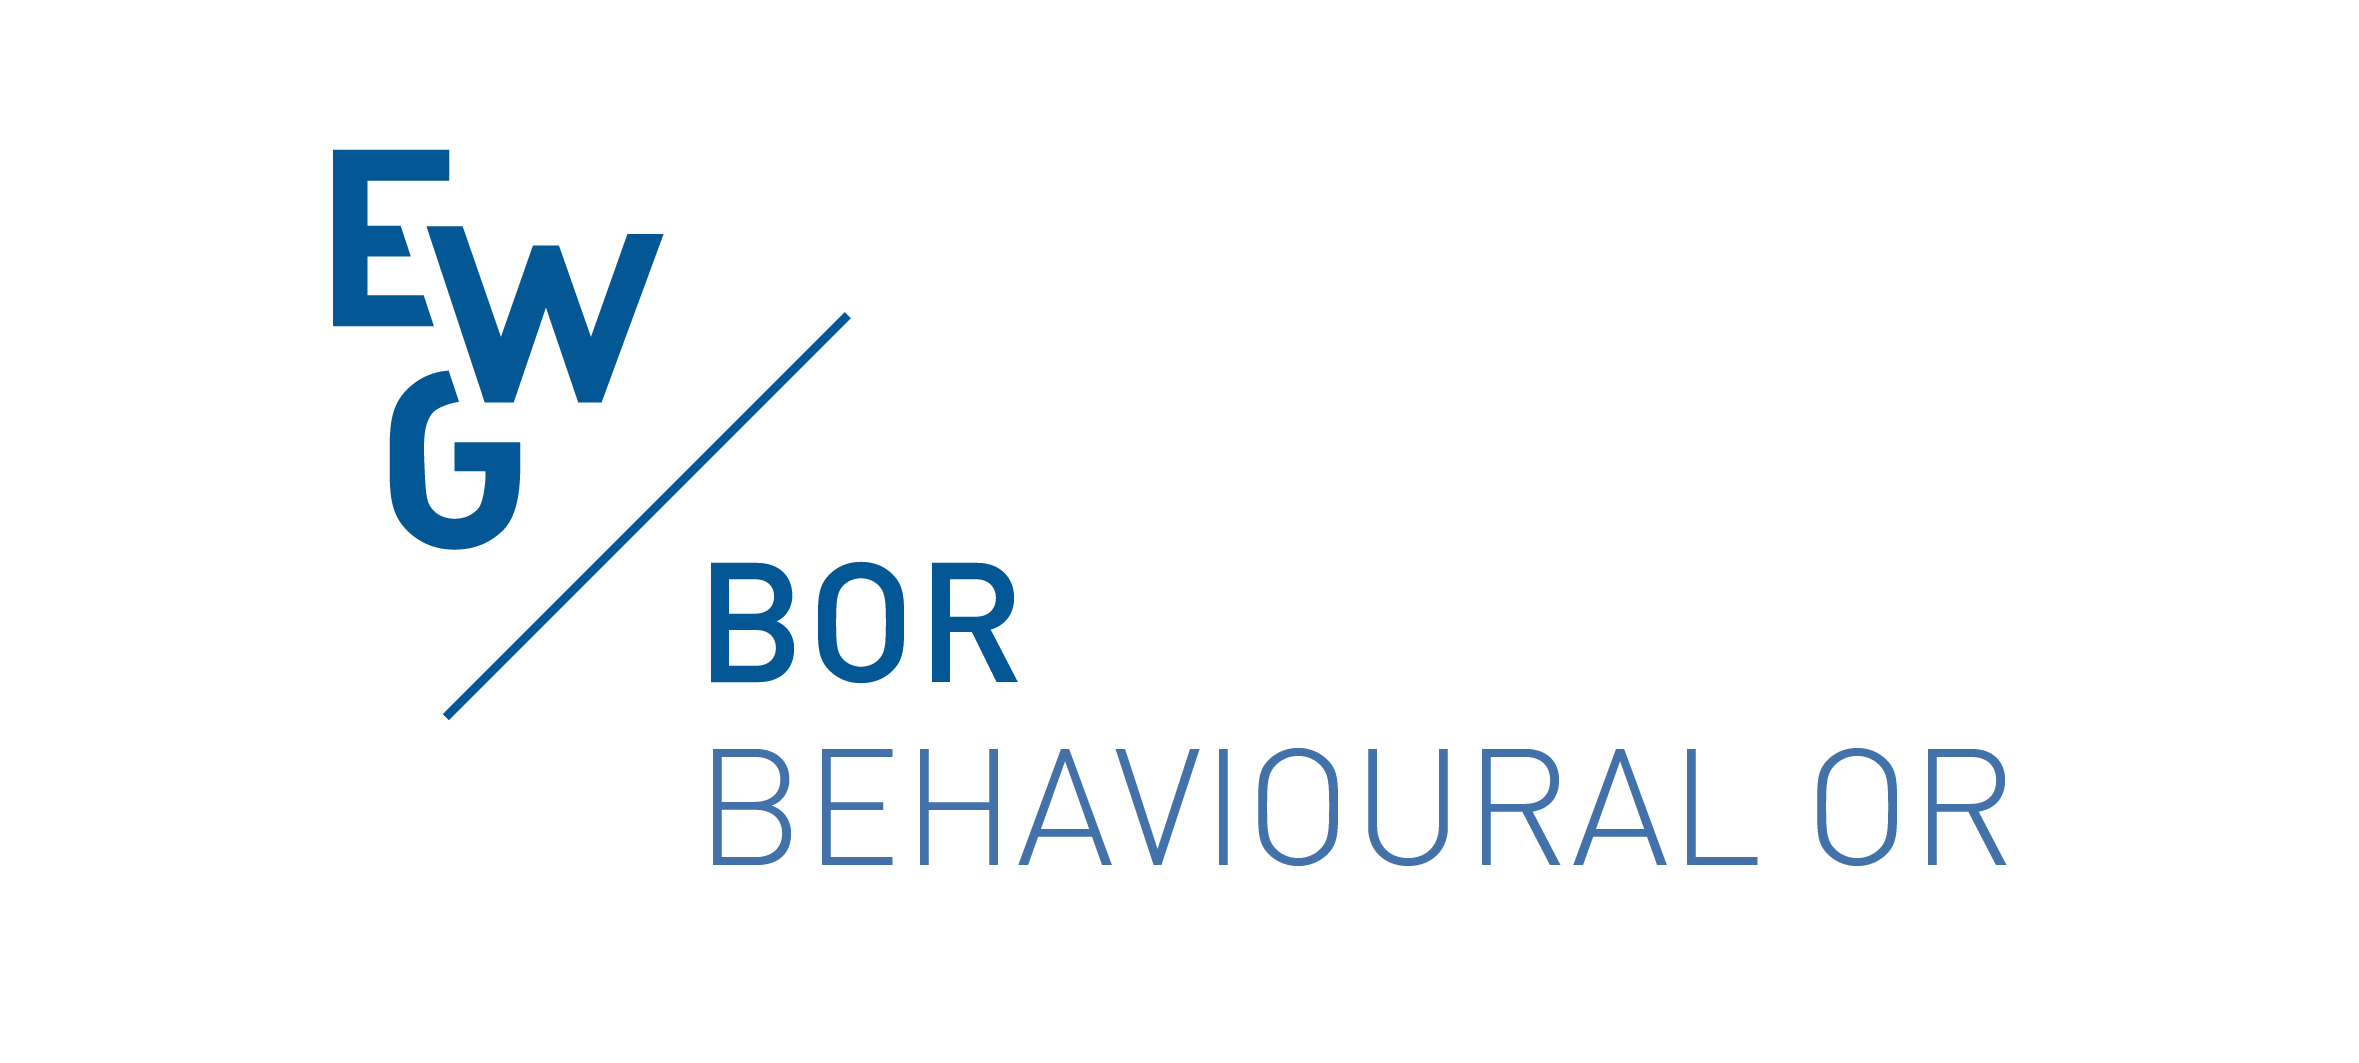 EURO working group on Behavioural OR (BOR)